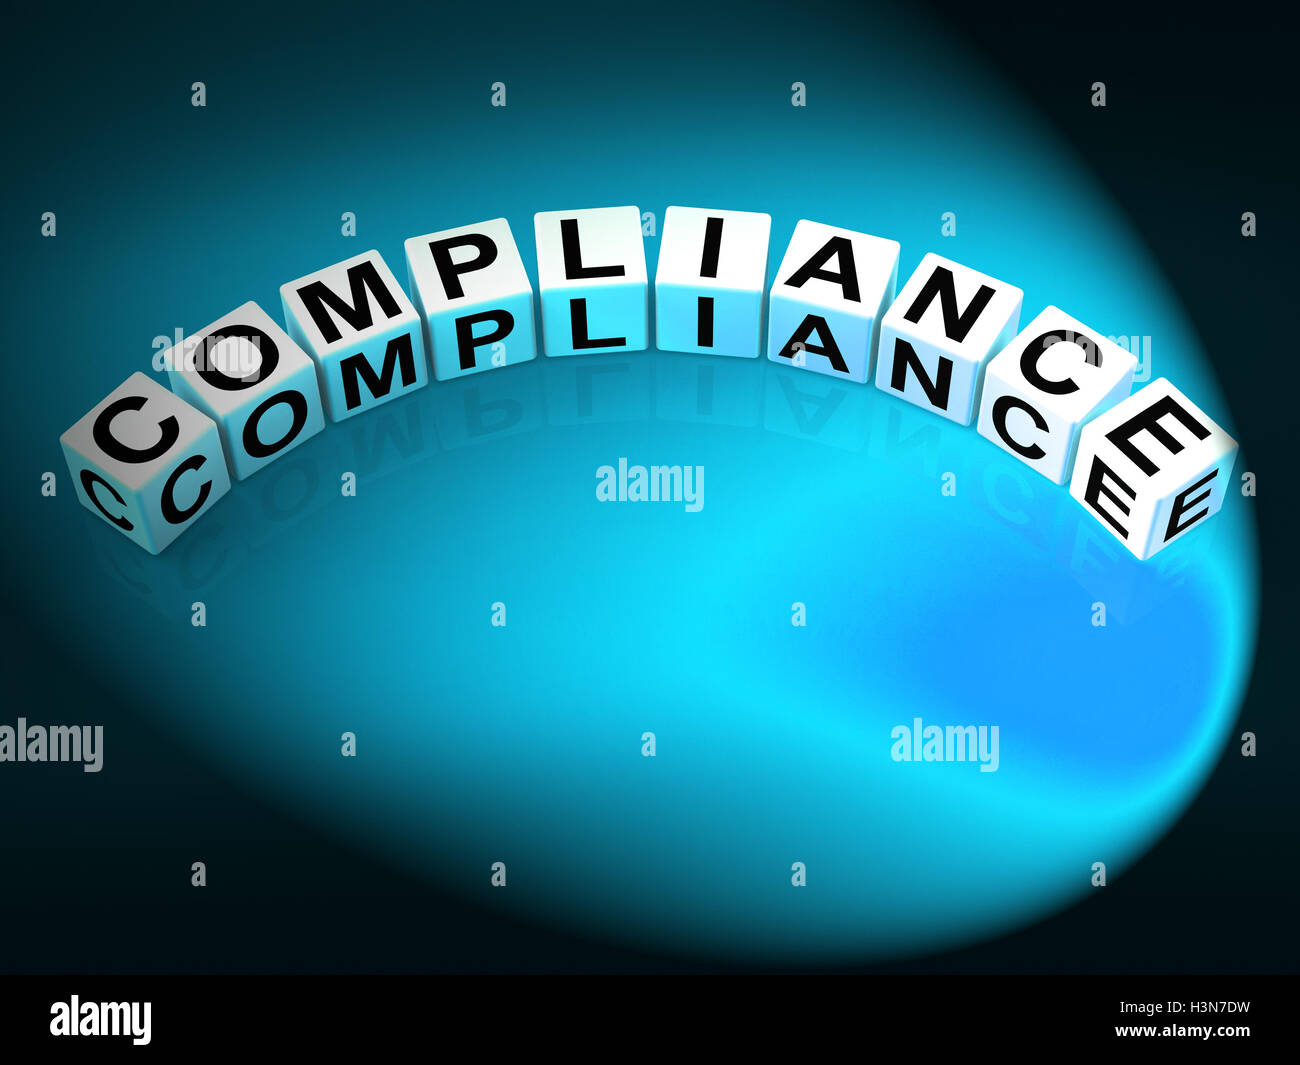 Compliance Letters Mean Agreeing To Rules And Policy Stock Photo